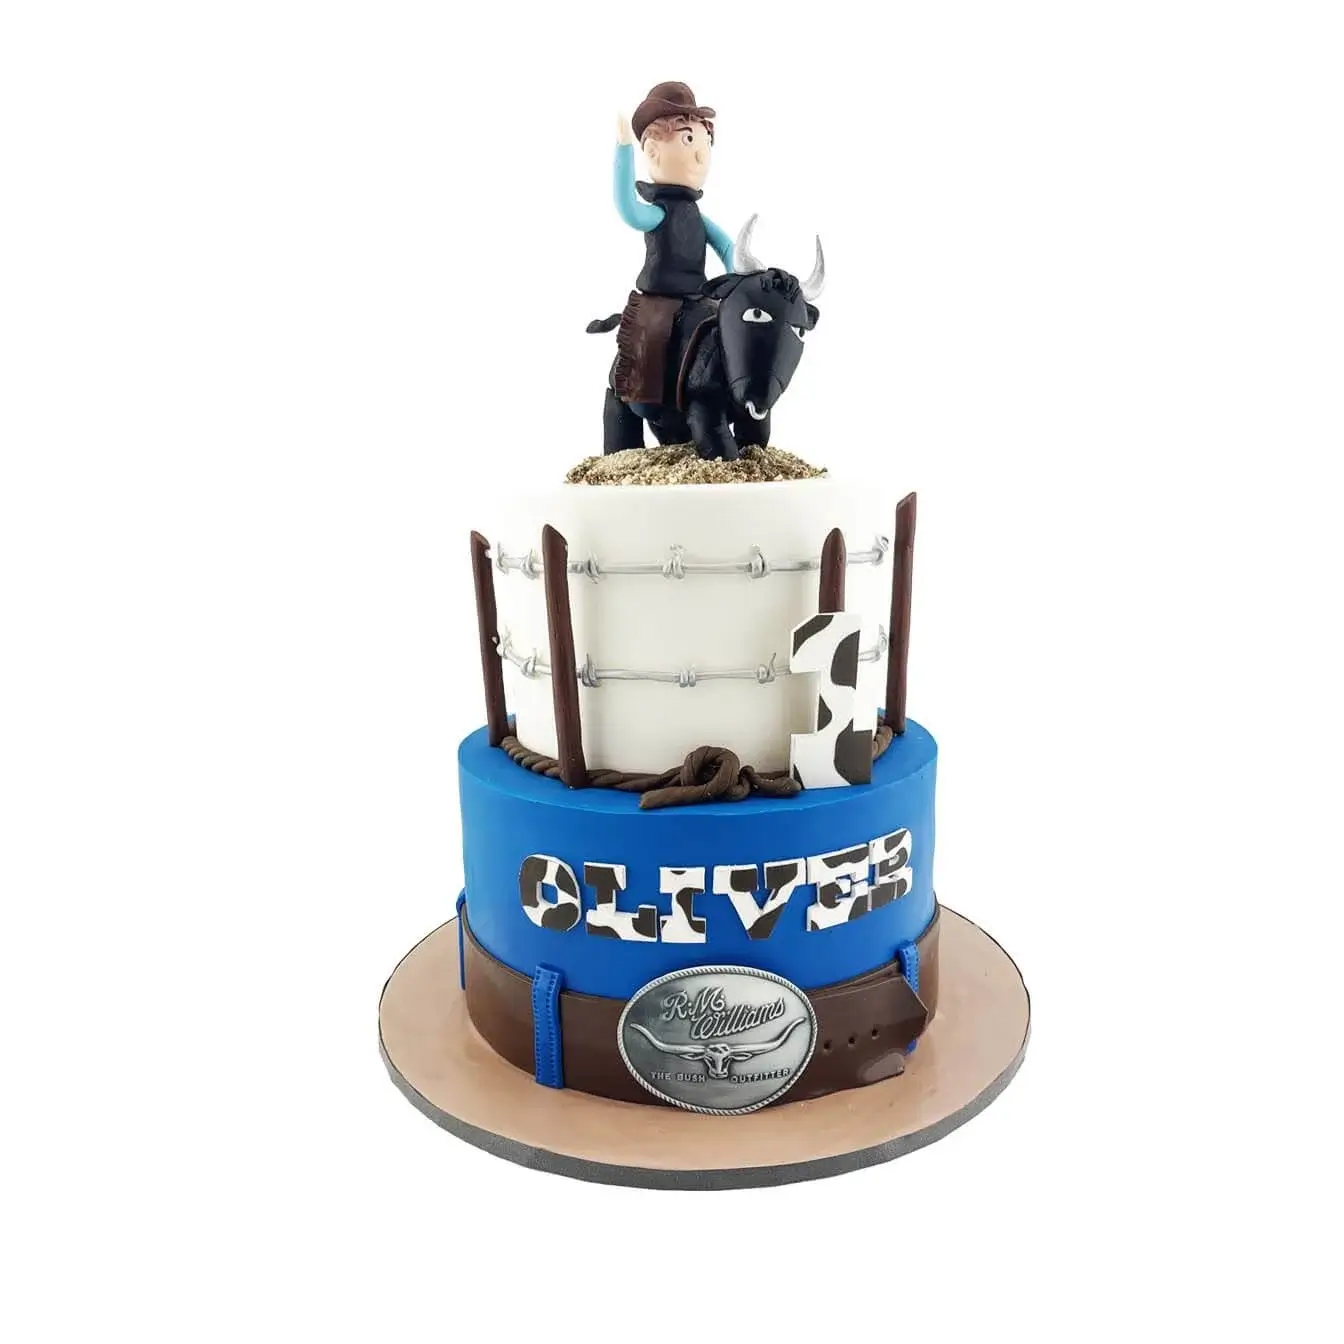 Rodeo Roundup Cake with Bucking Bull and Belt Buckle - 2-tier cake with a white top tier featuring a barbed wire fence and a fondant-sculpted bucking bull, and a blue bottom tier that looks like a pair of jeans with a brown leather belt and a silver belt buckle customized with the child's name in cow print.